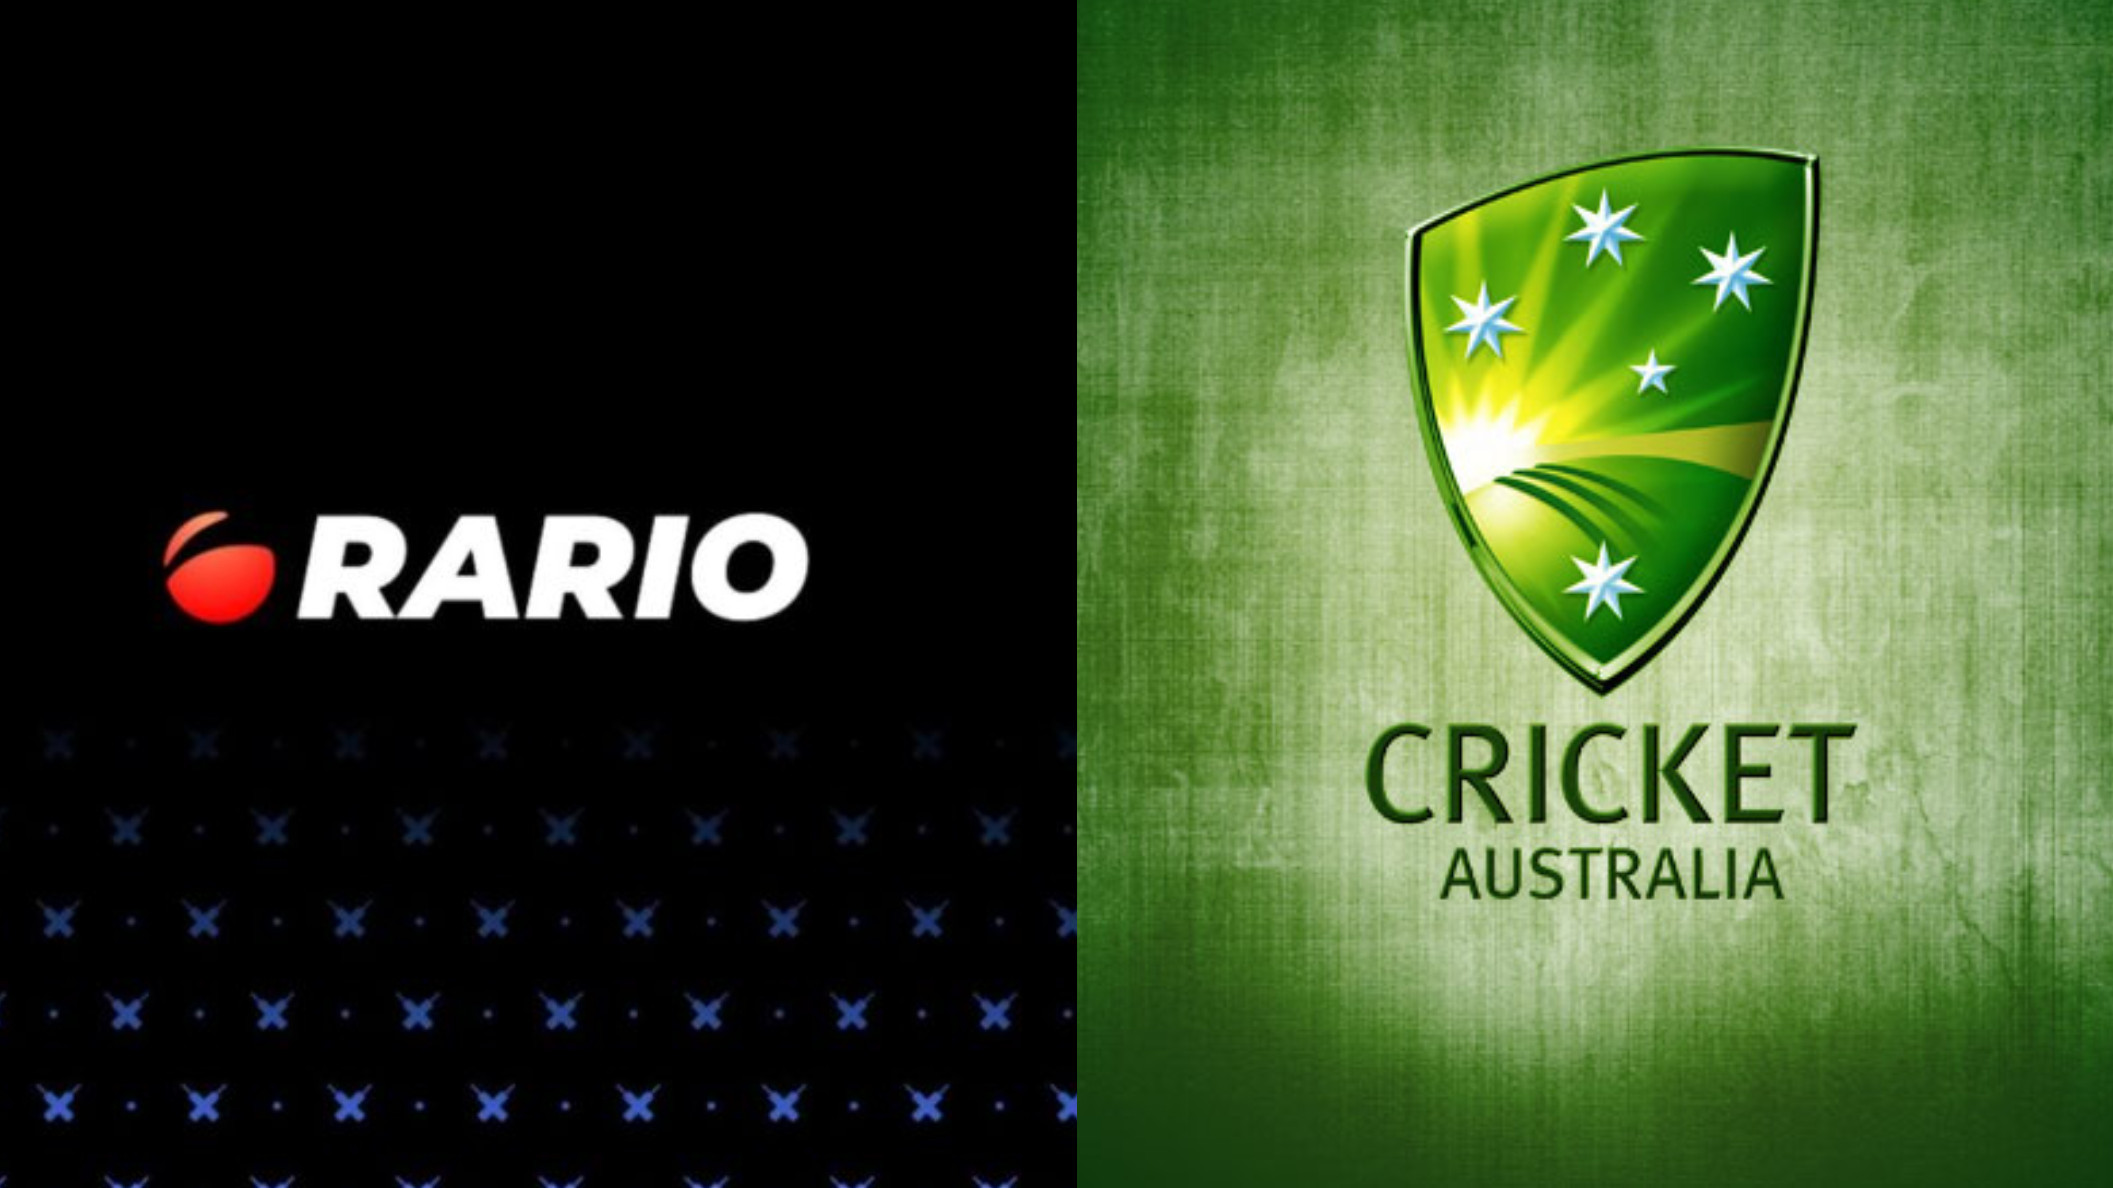 Five top moments of Australian Cricket that fans would love to see on Cricket NFT platform Rario